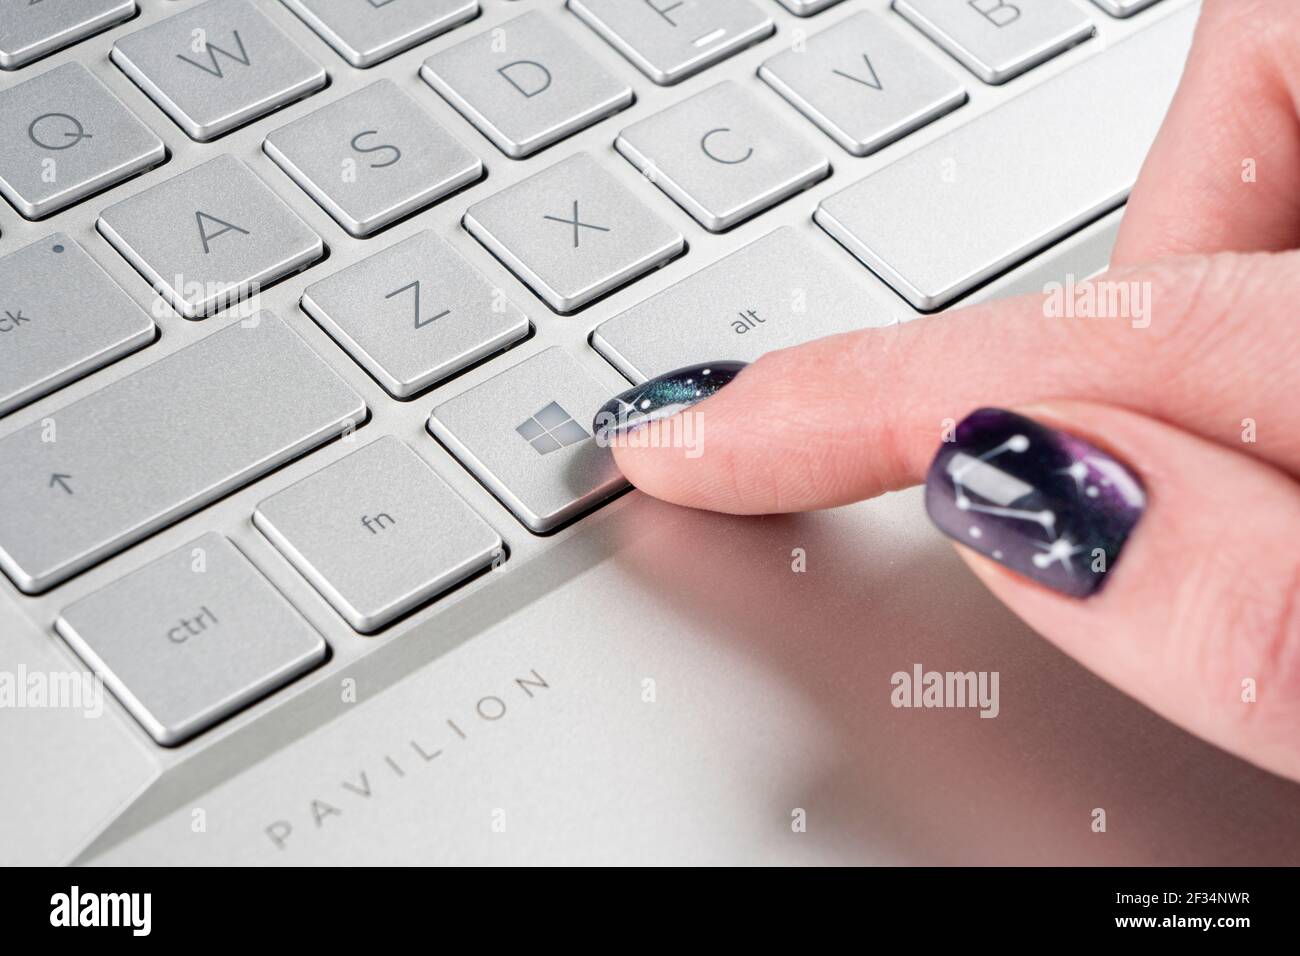 Sankt-petersburg, Russia, March 9, 2021: Laptop user finger pressing Windows icon key button on Microsoft Windows keyboard. Woman hand pressing Micros Stock Photo